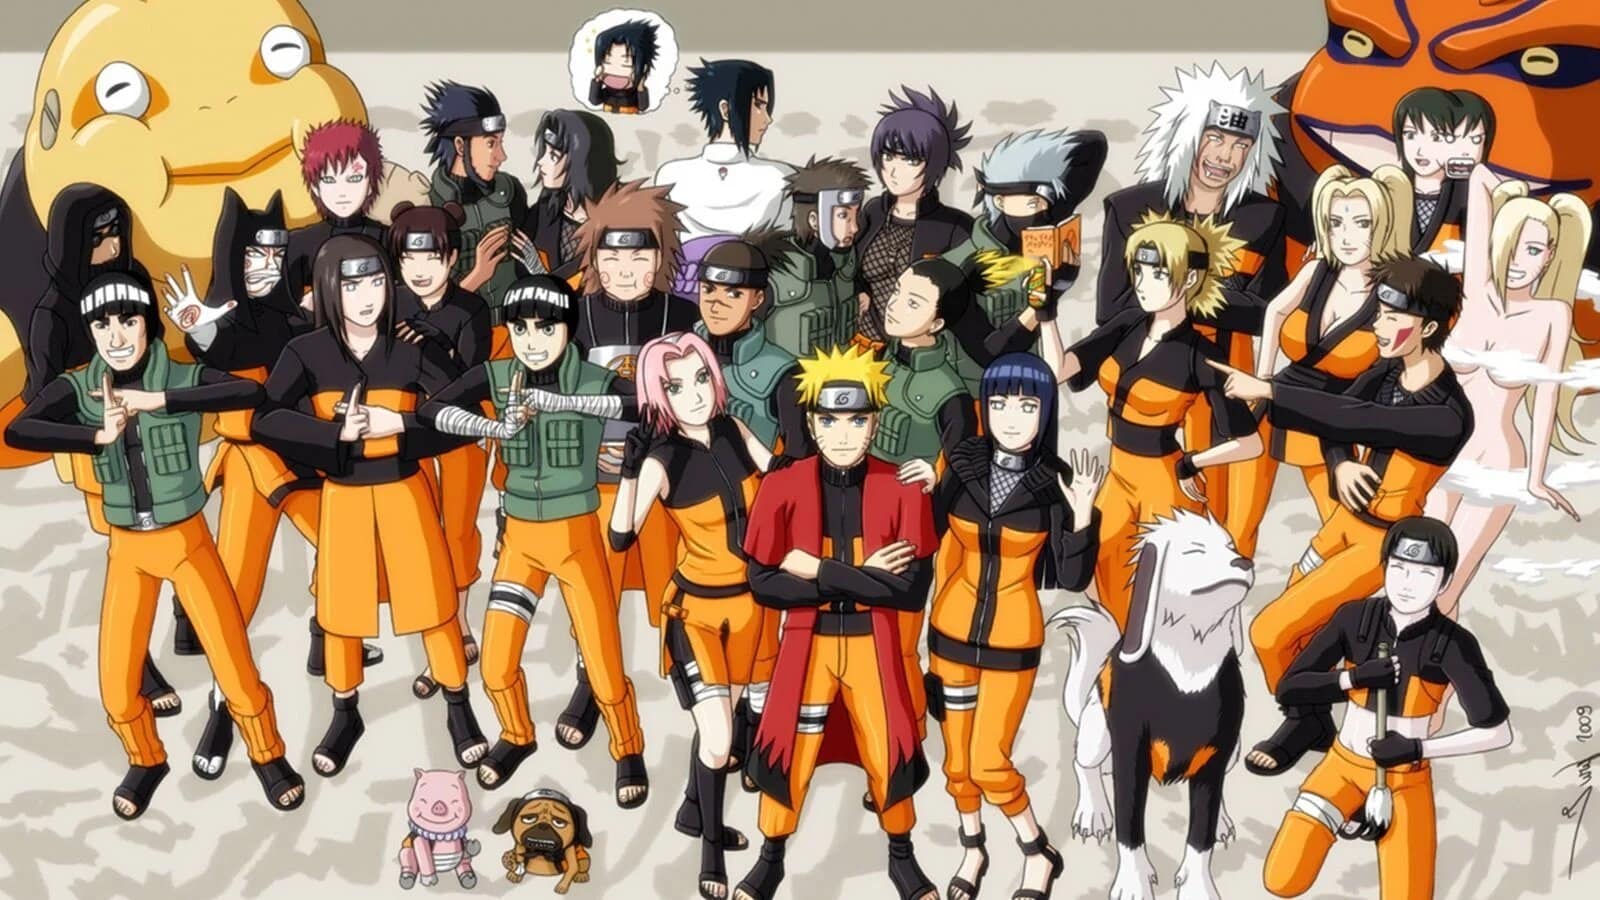 Naruto: Shippuden Is the Best and Worst of Shonen Anime